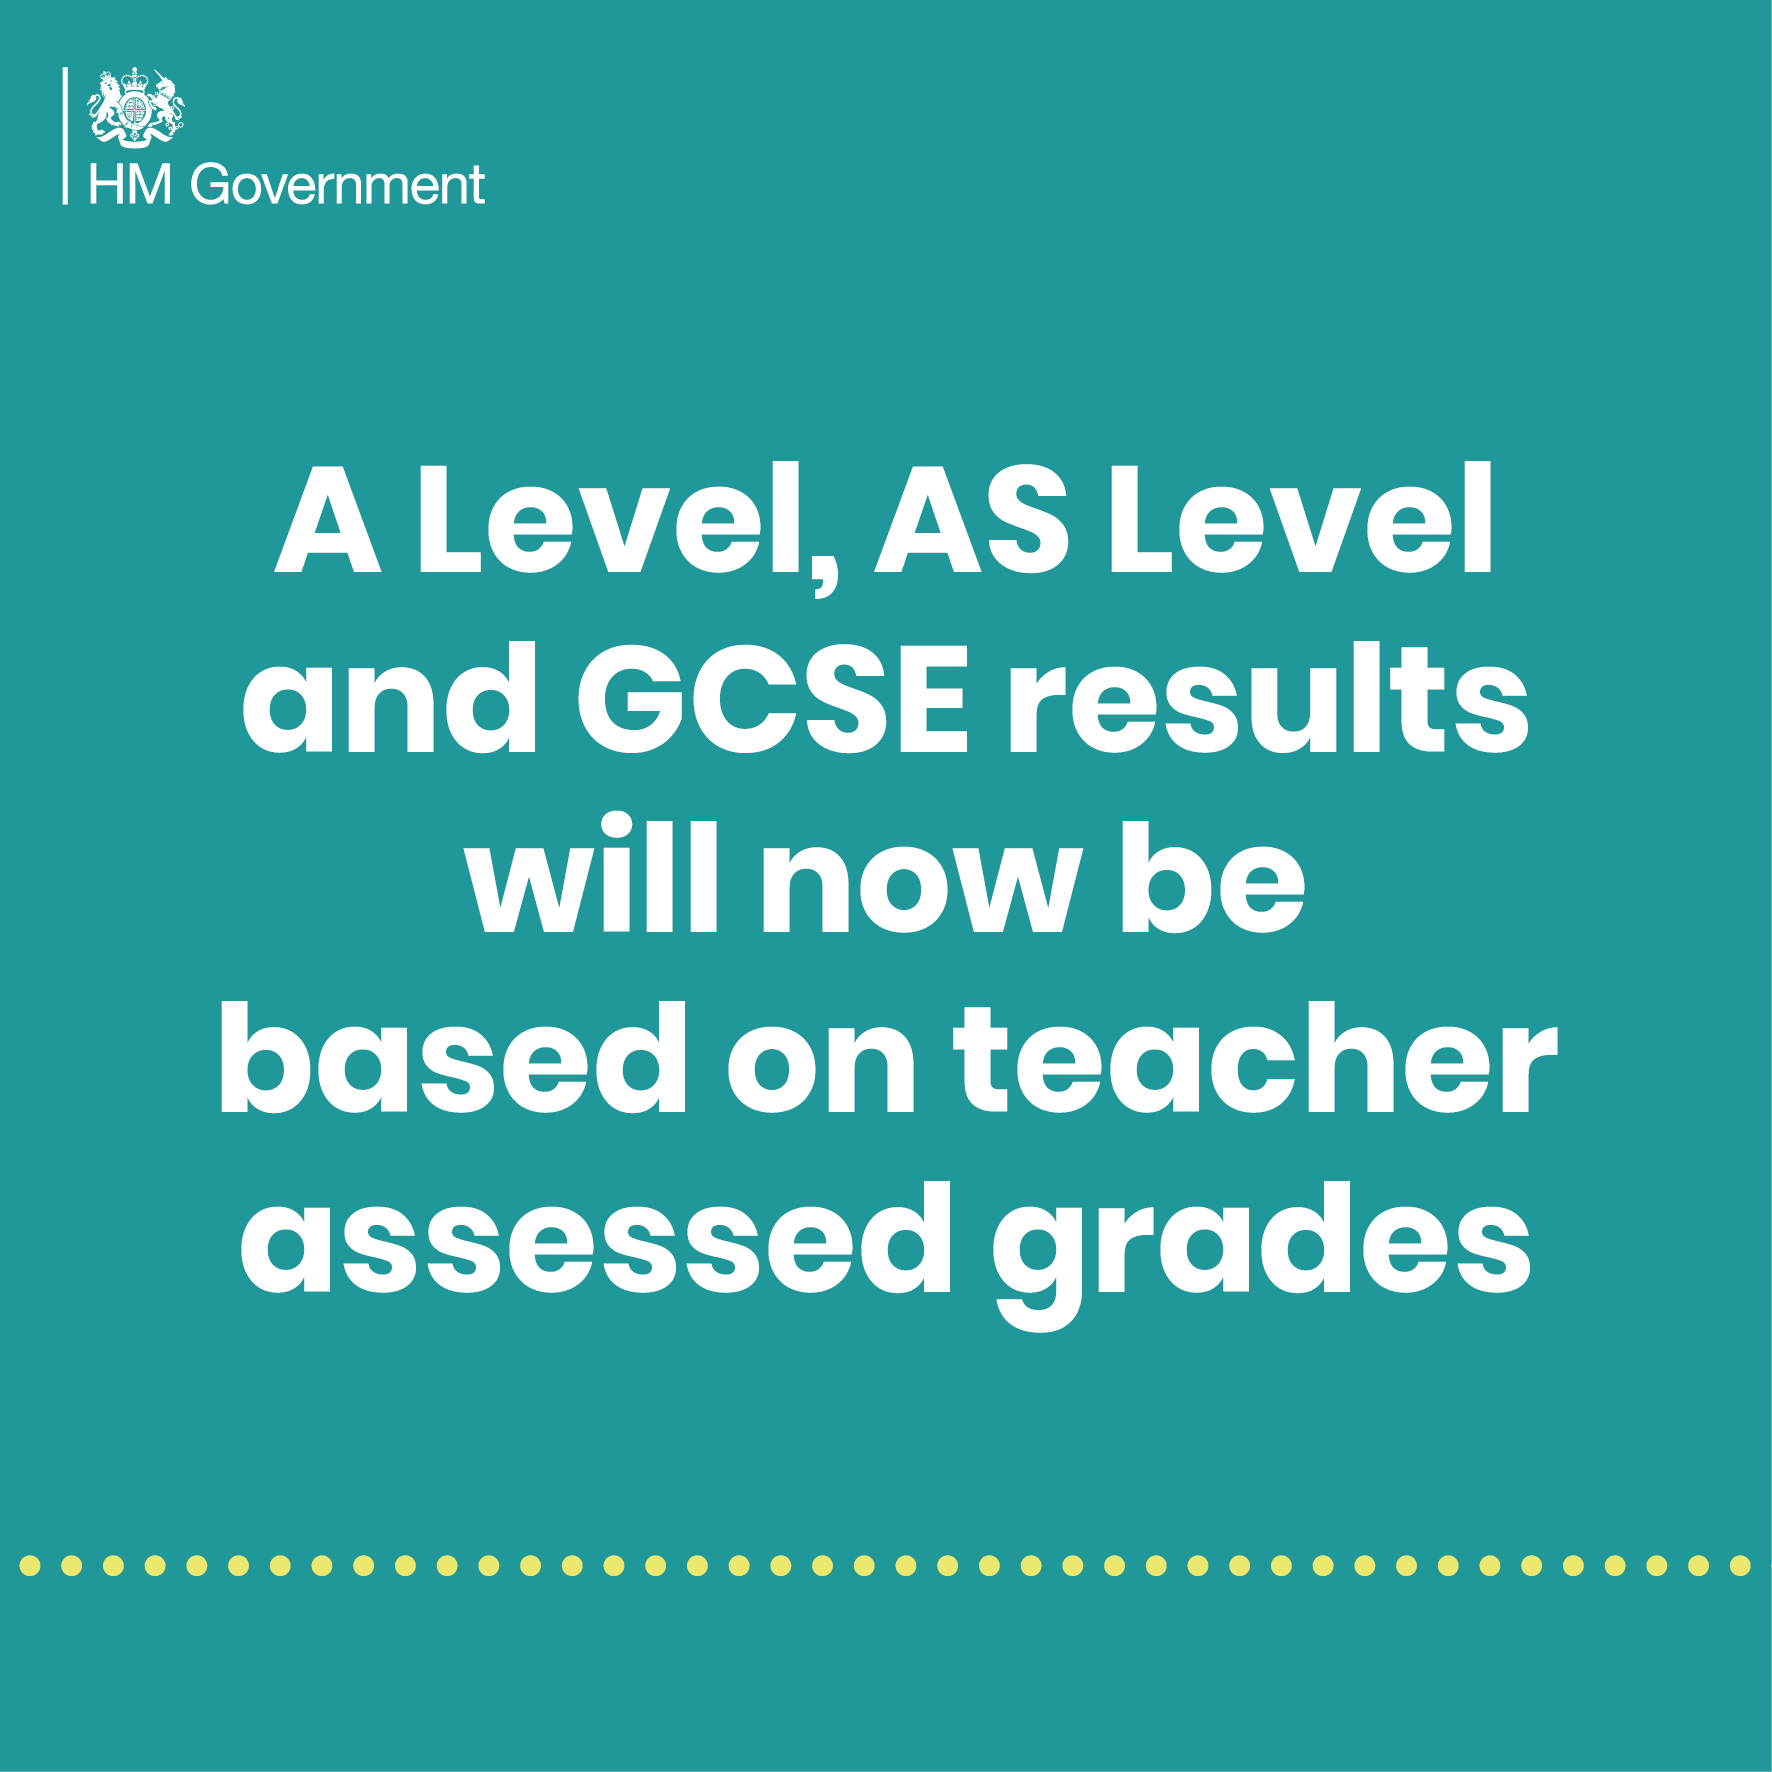 Full statement on today’s A level results  announcement